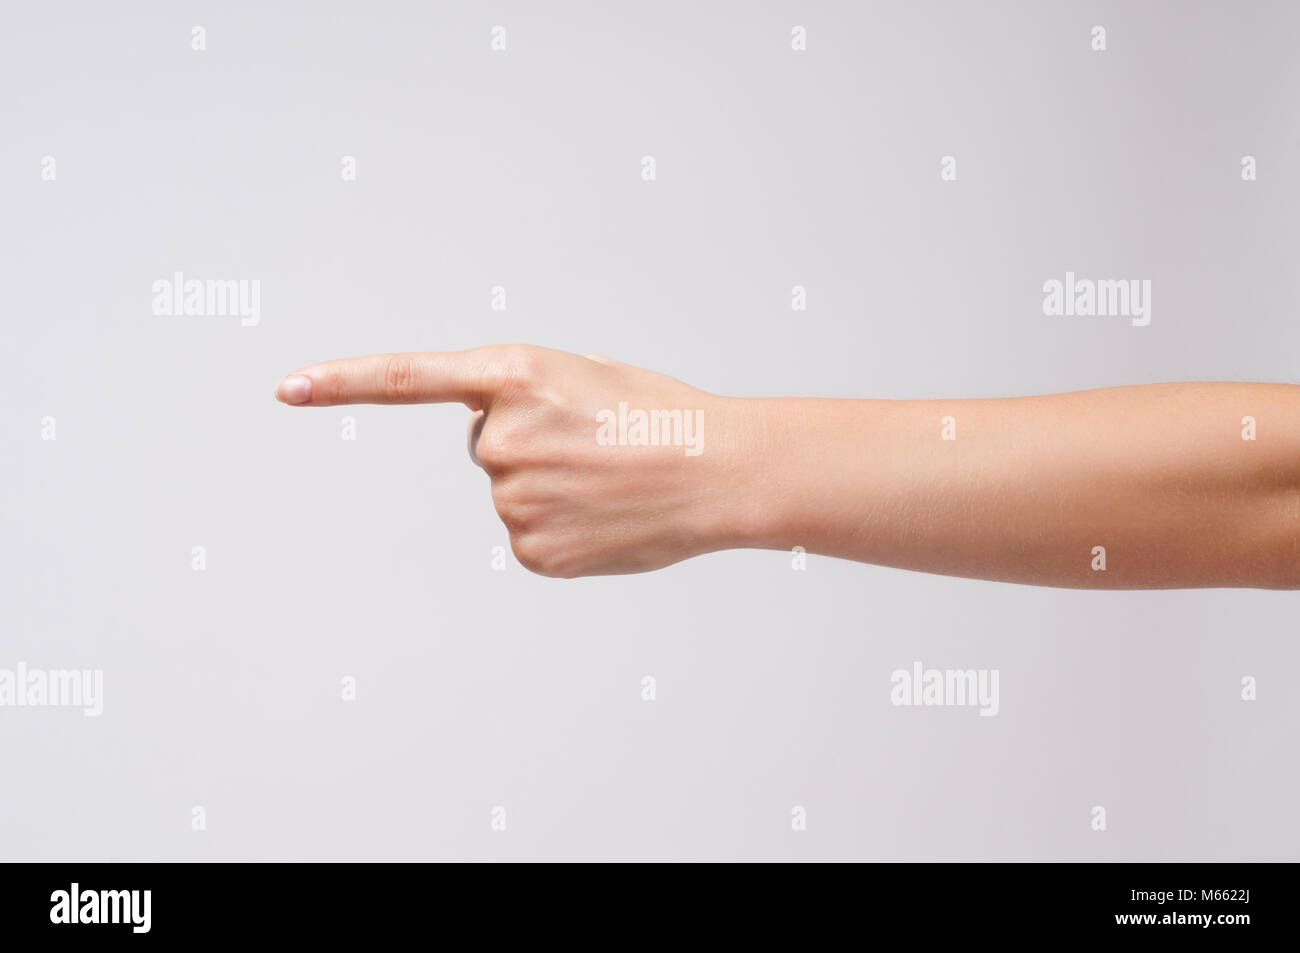 Woman's hand points a finger at something on white background. Stock Photo